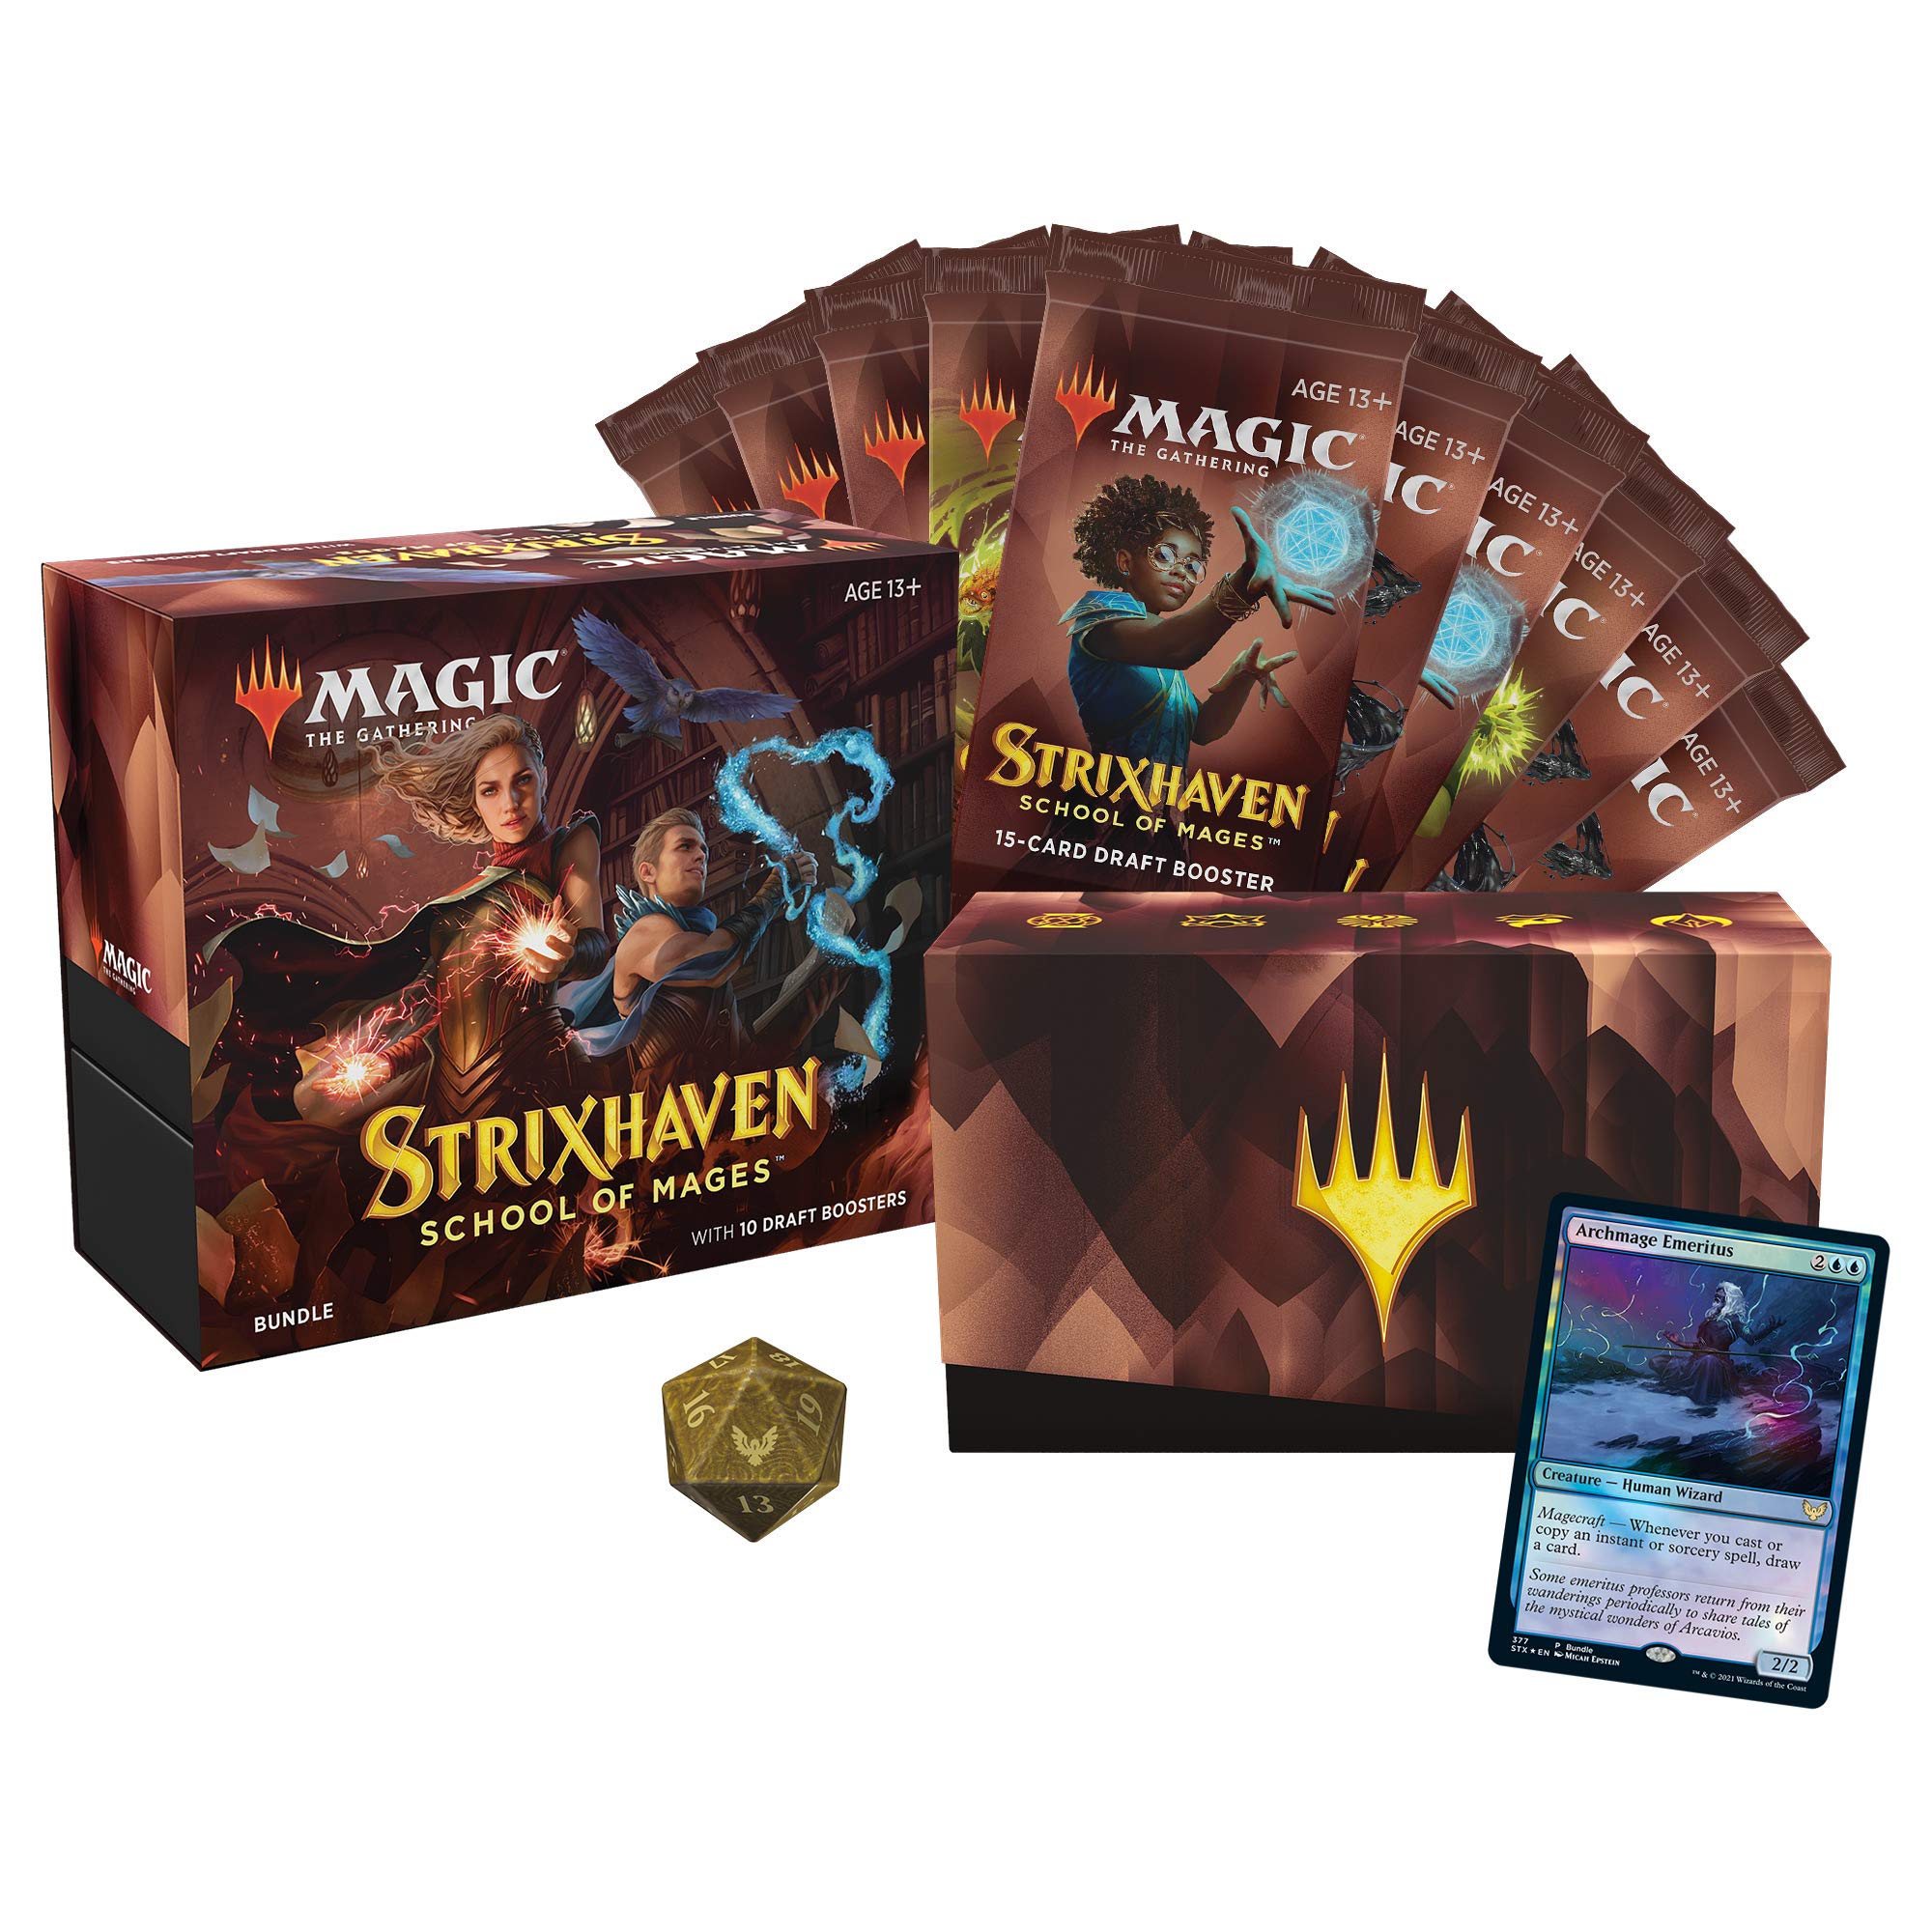 Magic The Gathering Strixhaven Bundle | 10 Draft Boosters (150 Magic Cards) + Accessories, Brown